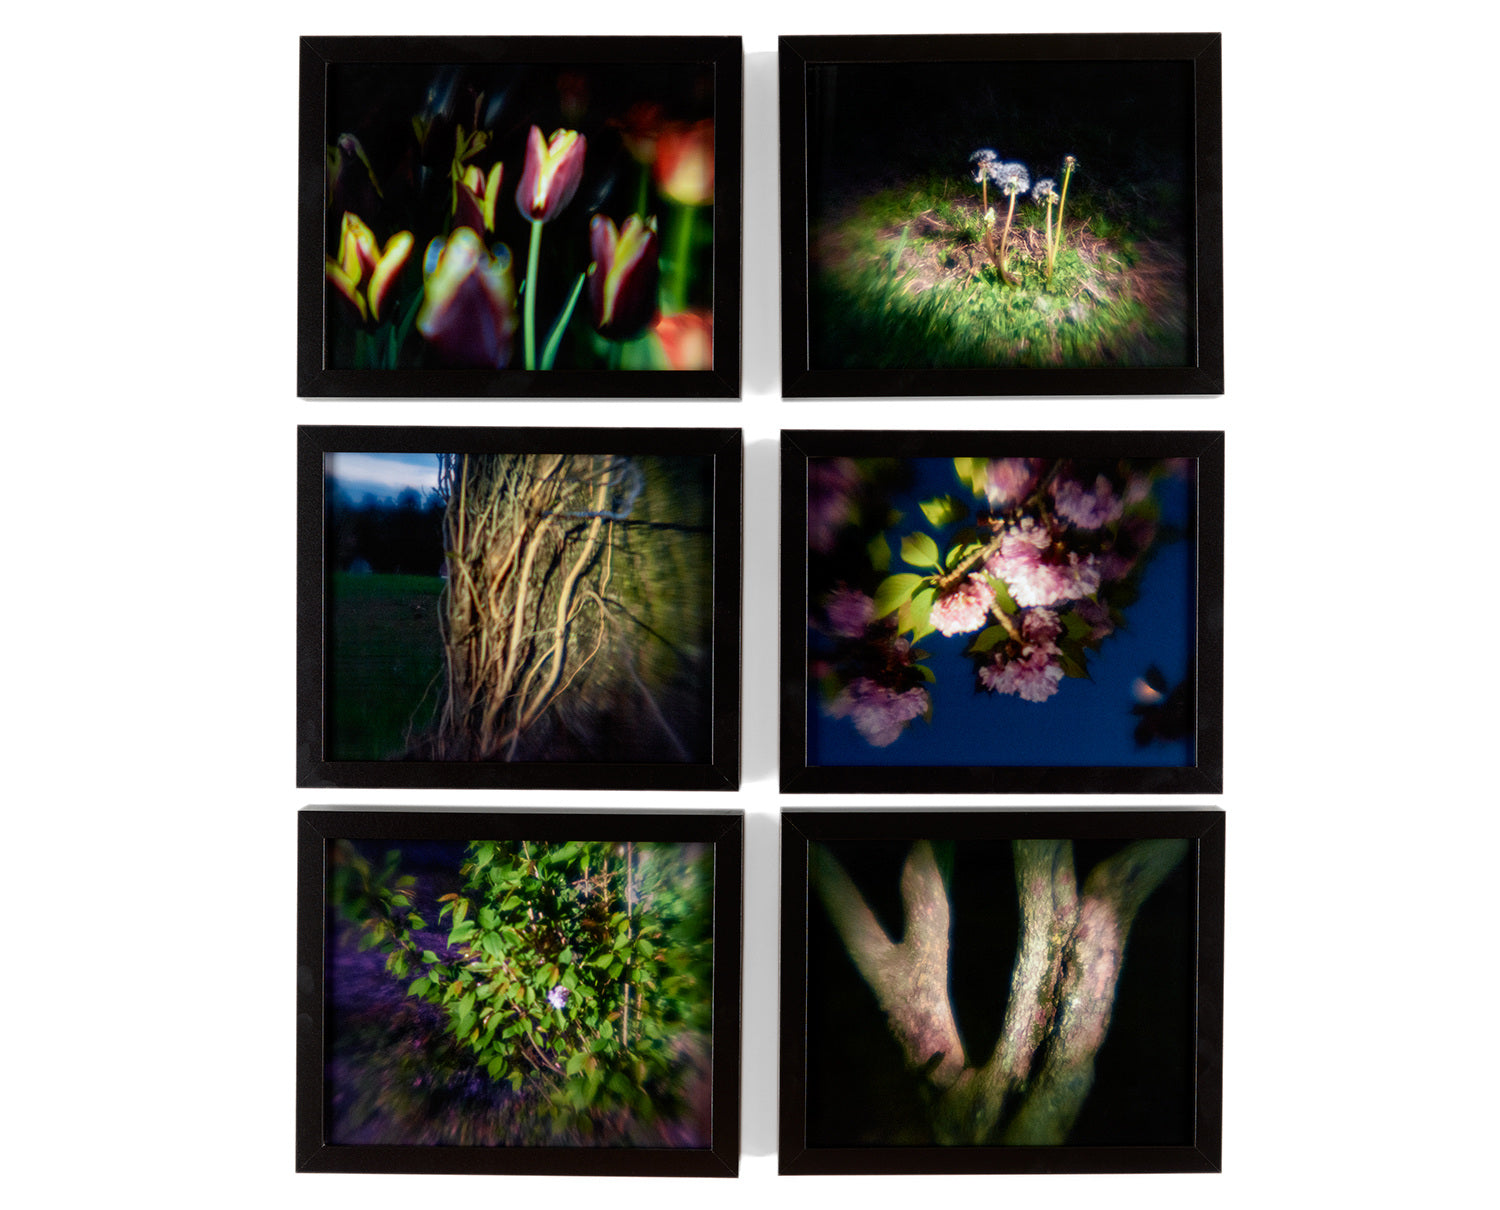 There Is A Light - Bark Photo Print (S/M sizes available)